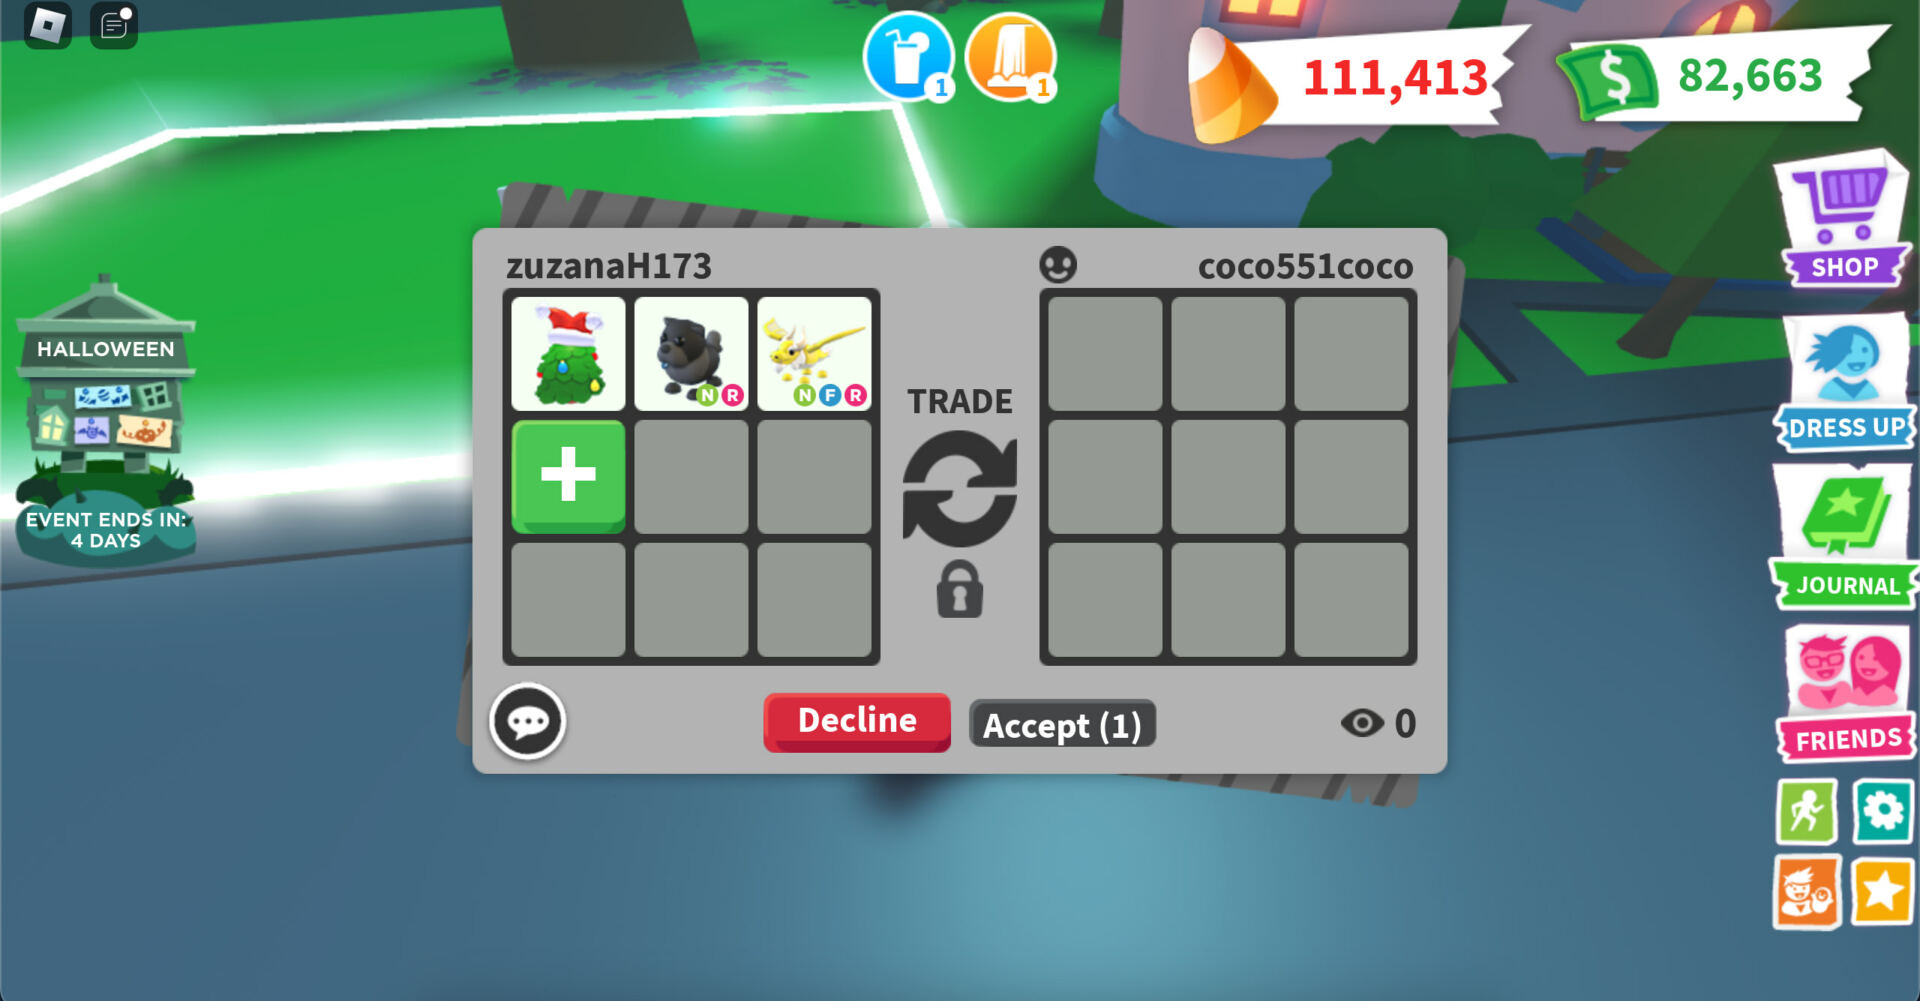 Trading in Roblox